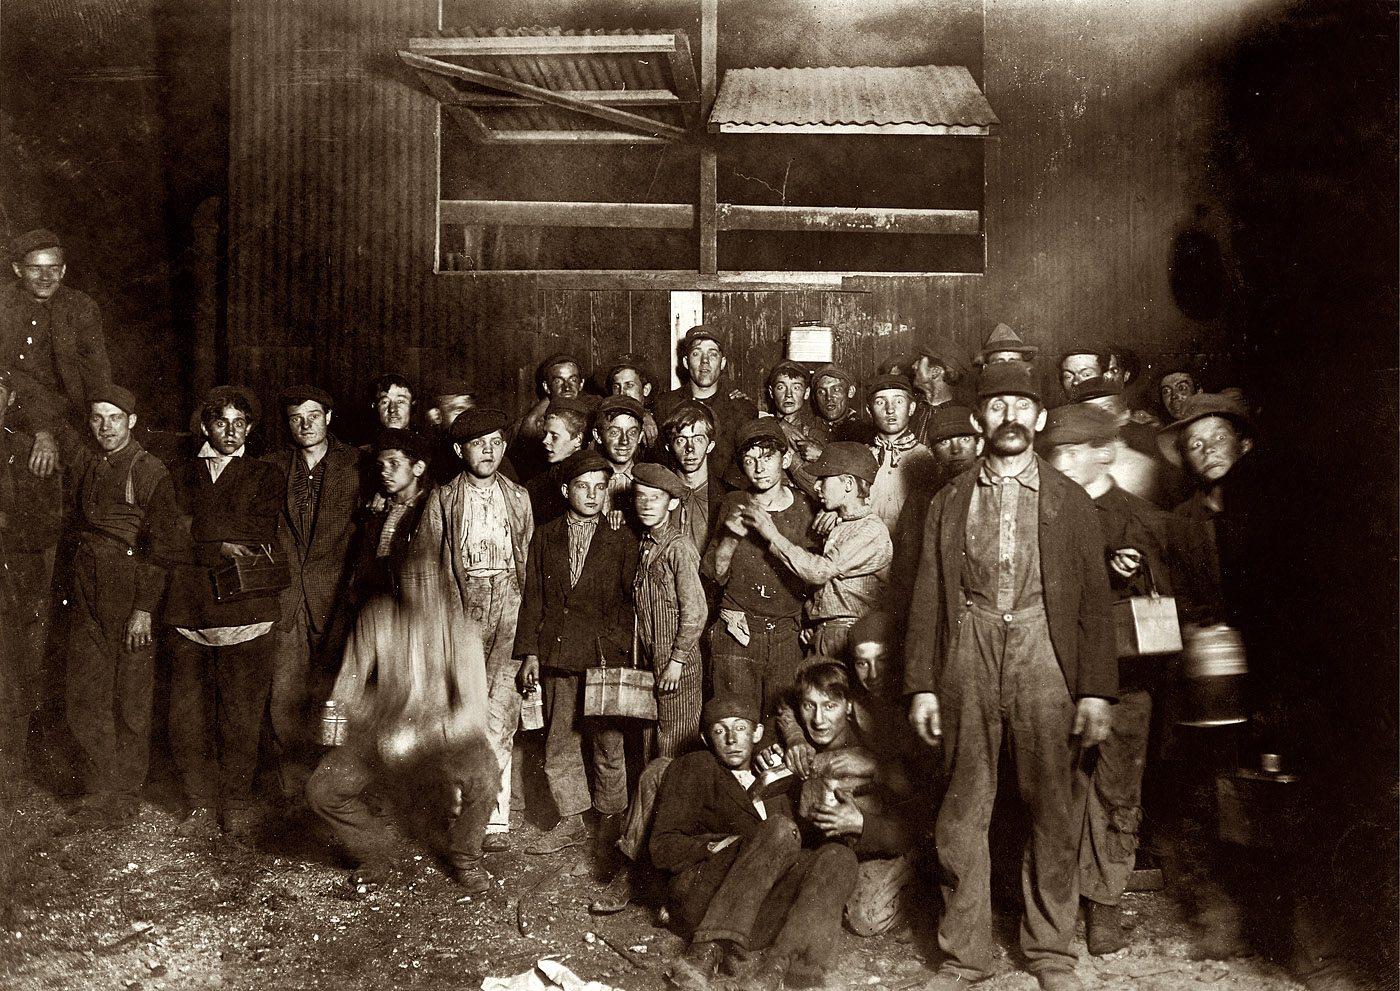 August 1908. "Night Shift Leaving for Home. Indiana Glass Works, 8 a.m." Photograph and caption by Lewis Wickes Hine. View full size.